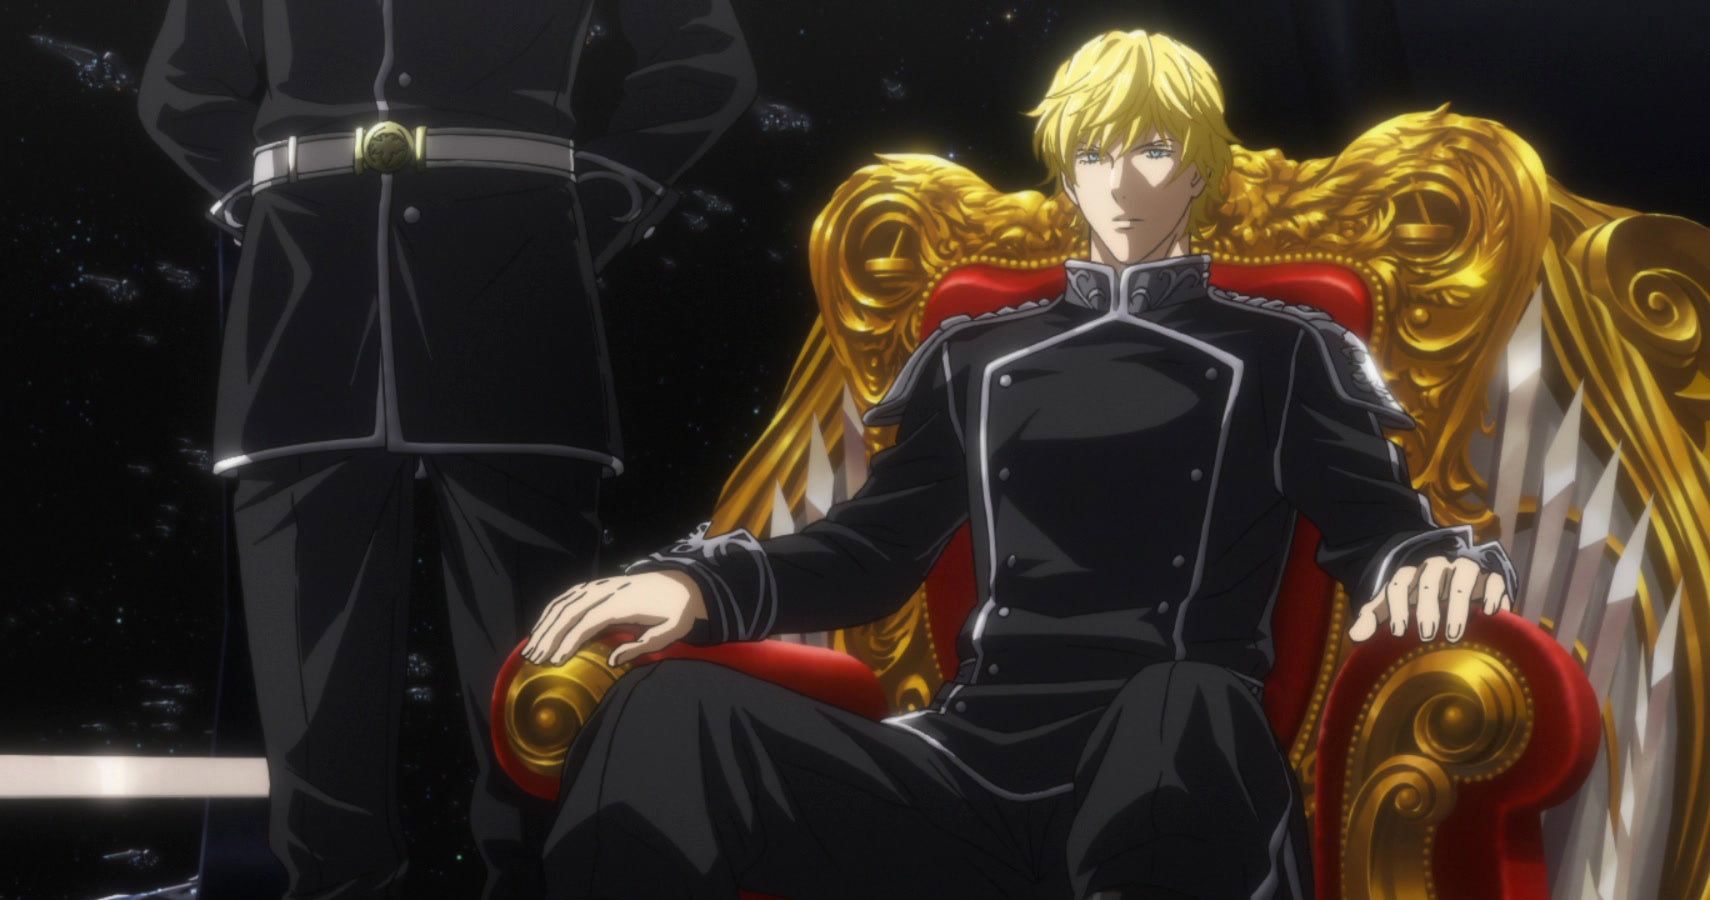 Legend of the Galactic Heroes Die Neue These Anime Gets Smartphone Game   News  Anime News Network